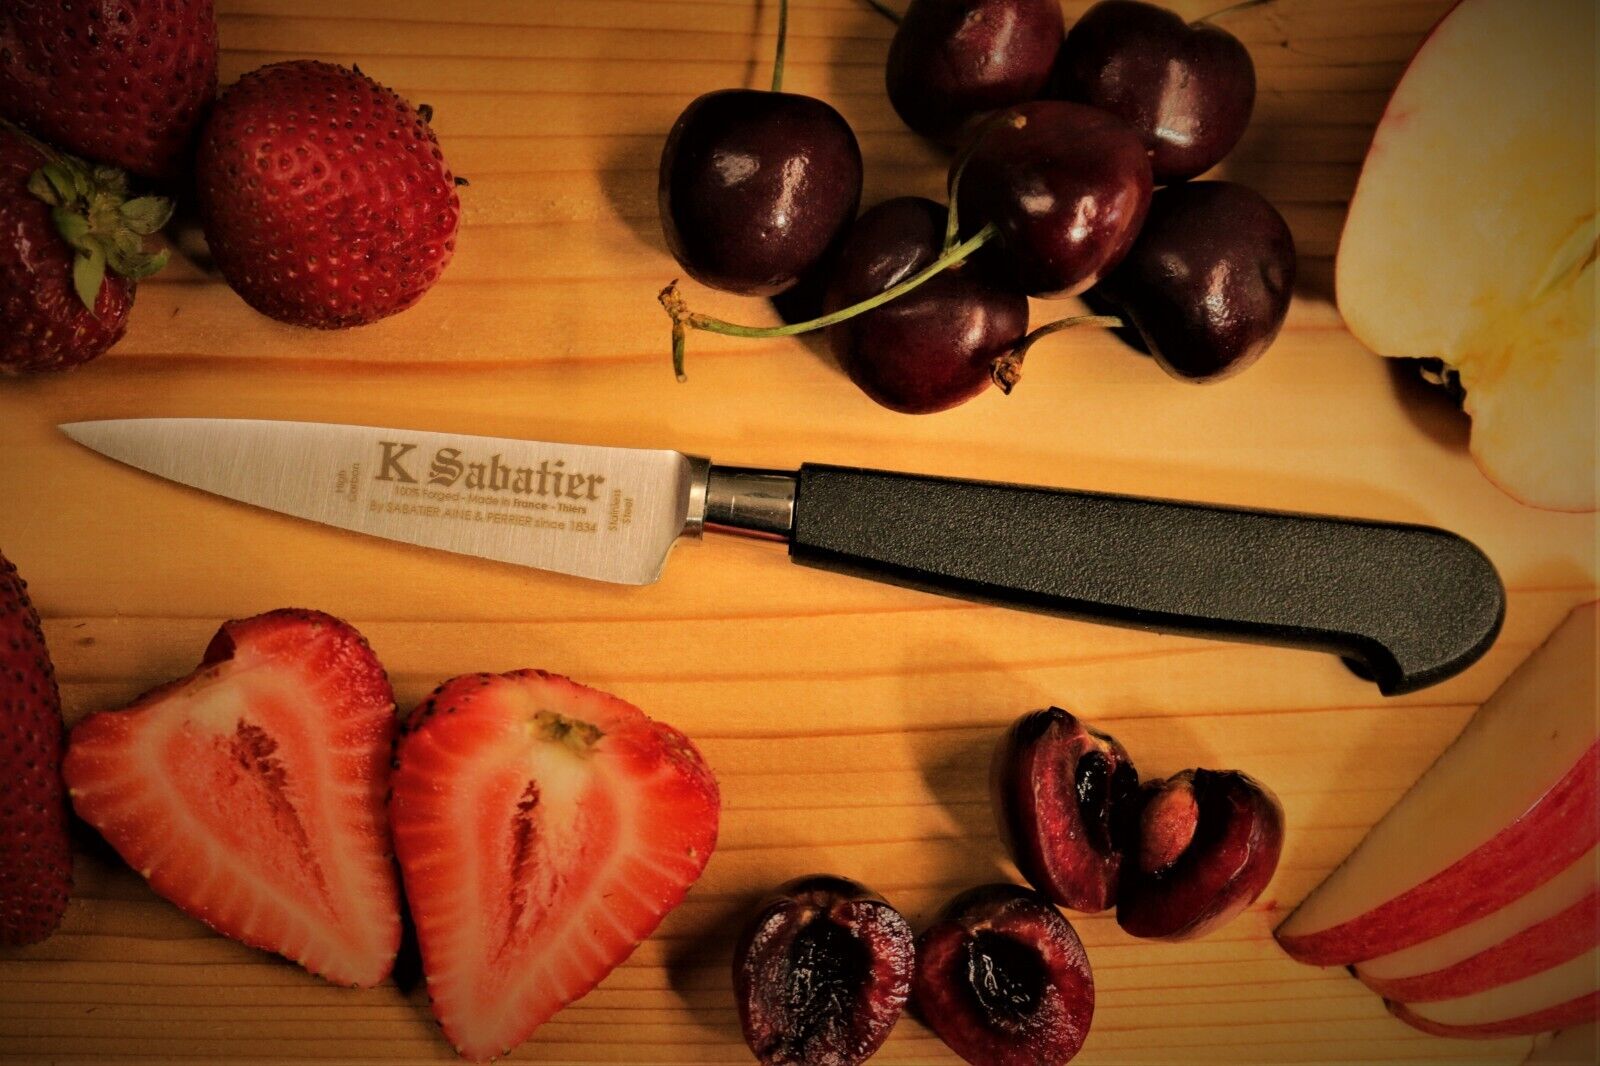 Sabatier 3 inch ( Nogent style ) paring knife . Made in Thiers France